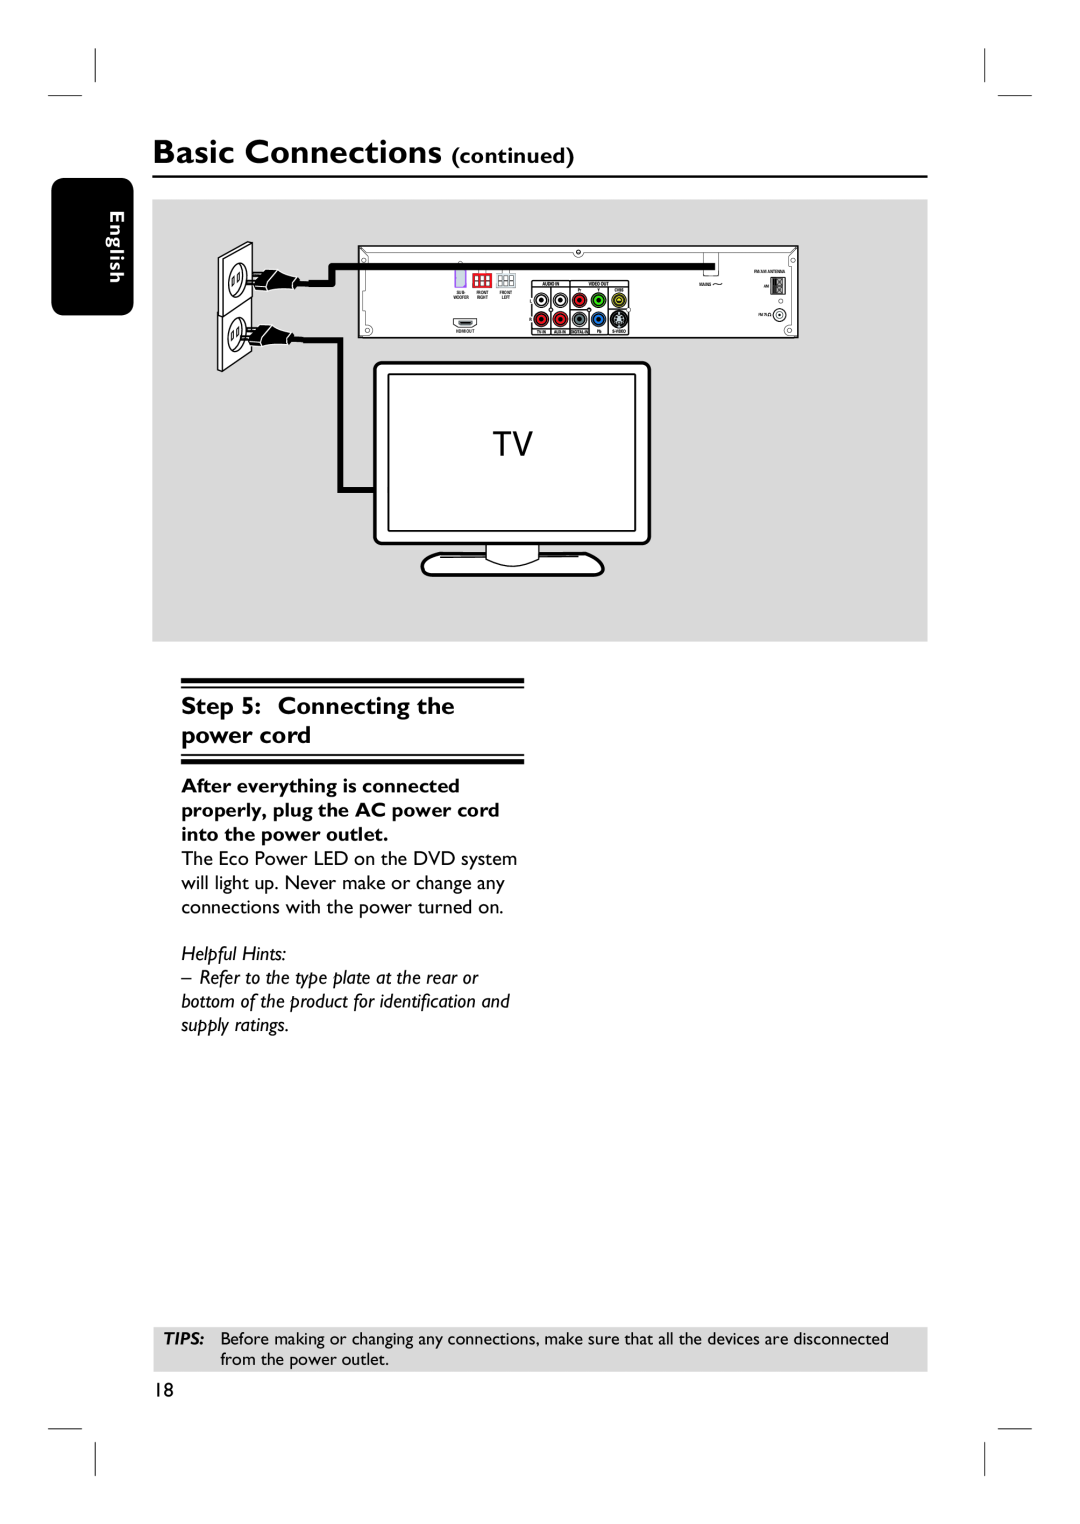 Philips HTS6500 user manual Connecting the power cord, Basic Connections continued, English, Helpful Hints 